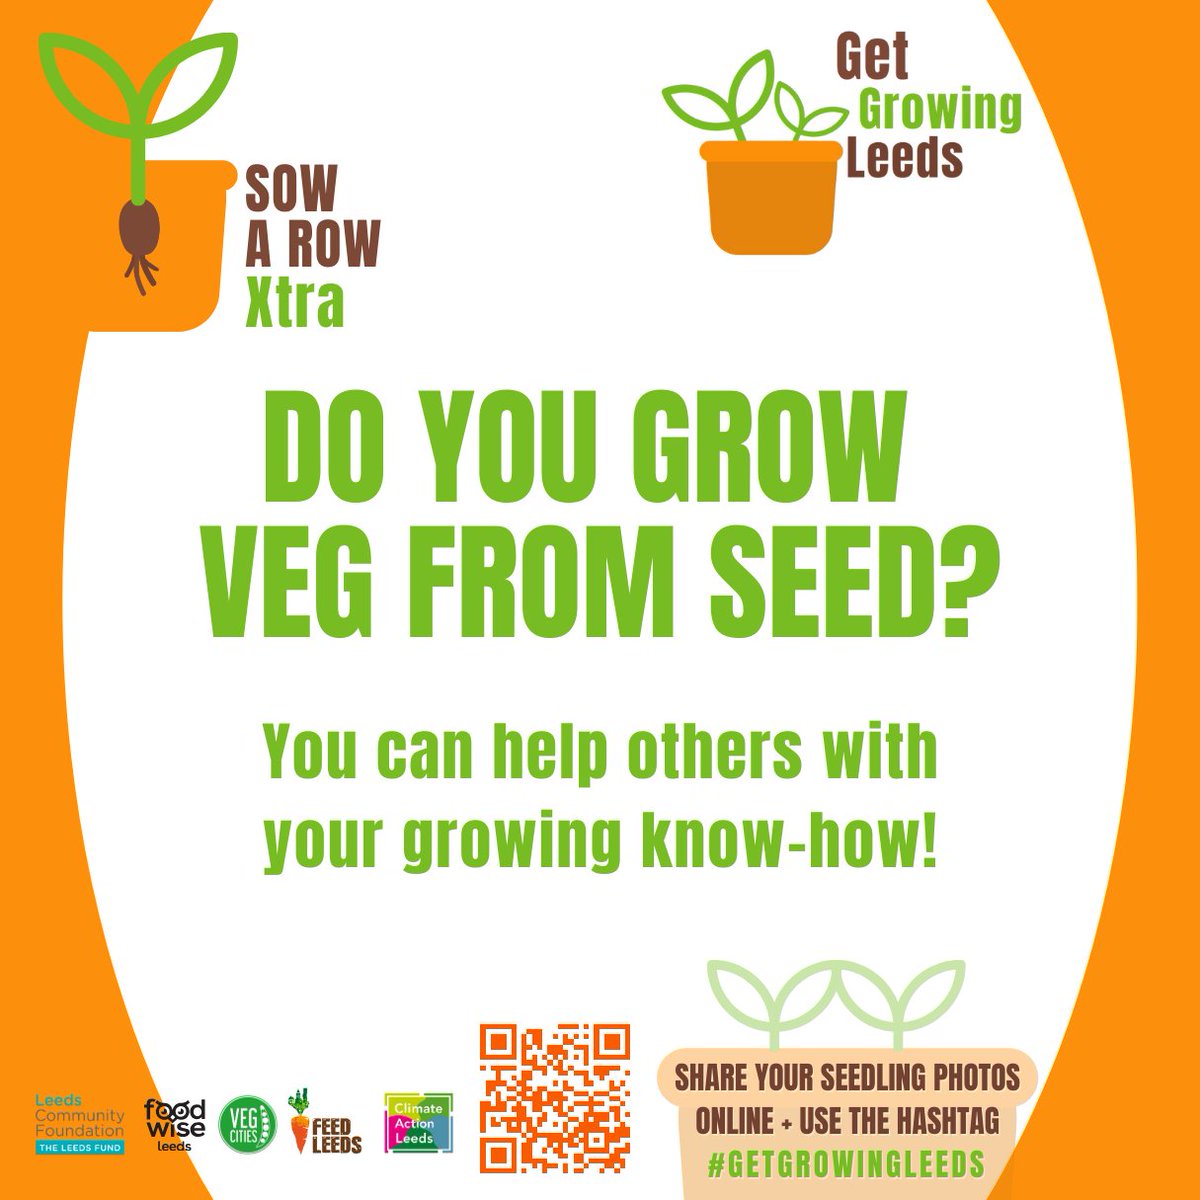 Its #GoodToGrow Week And we are launching our #GetGrowingLeed campain with #SowARowXtra We want to get more people growing in #Leeds! Do you grow veg from seed? If so, you can help others with your know-how! For more details visit: feedleeds.org/sowx/ #getgrowingleeds